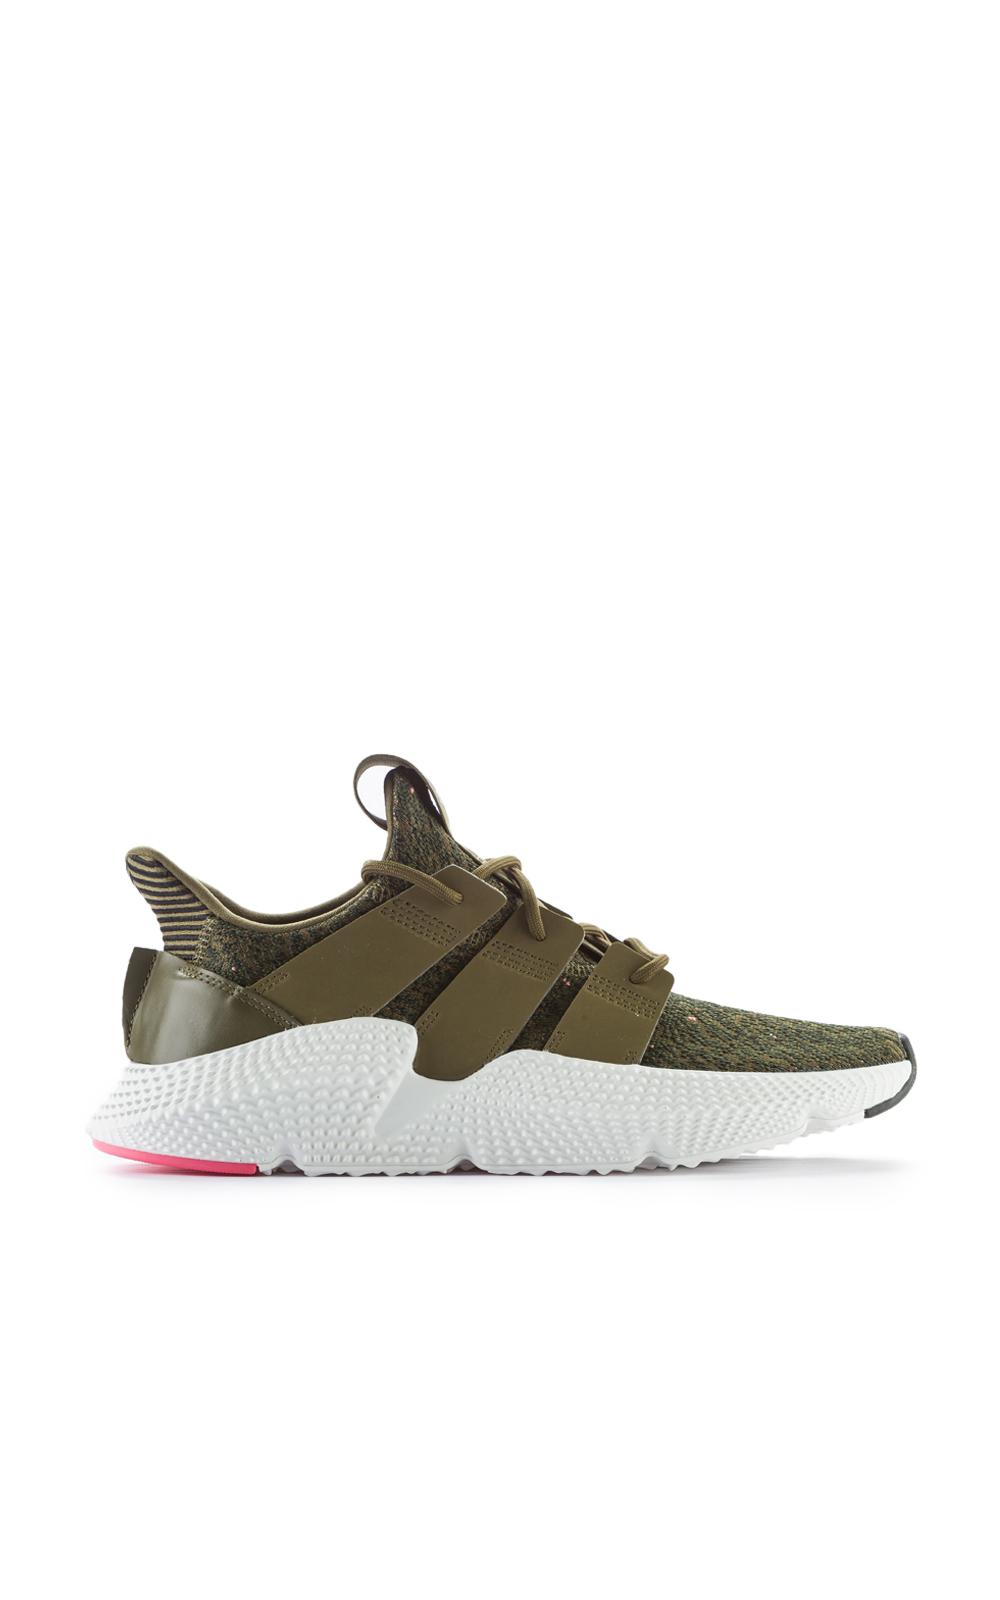 adidas prophere olive green